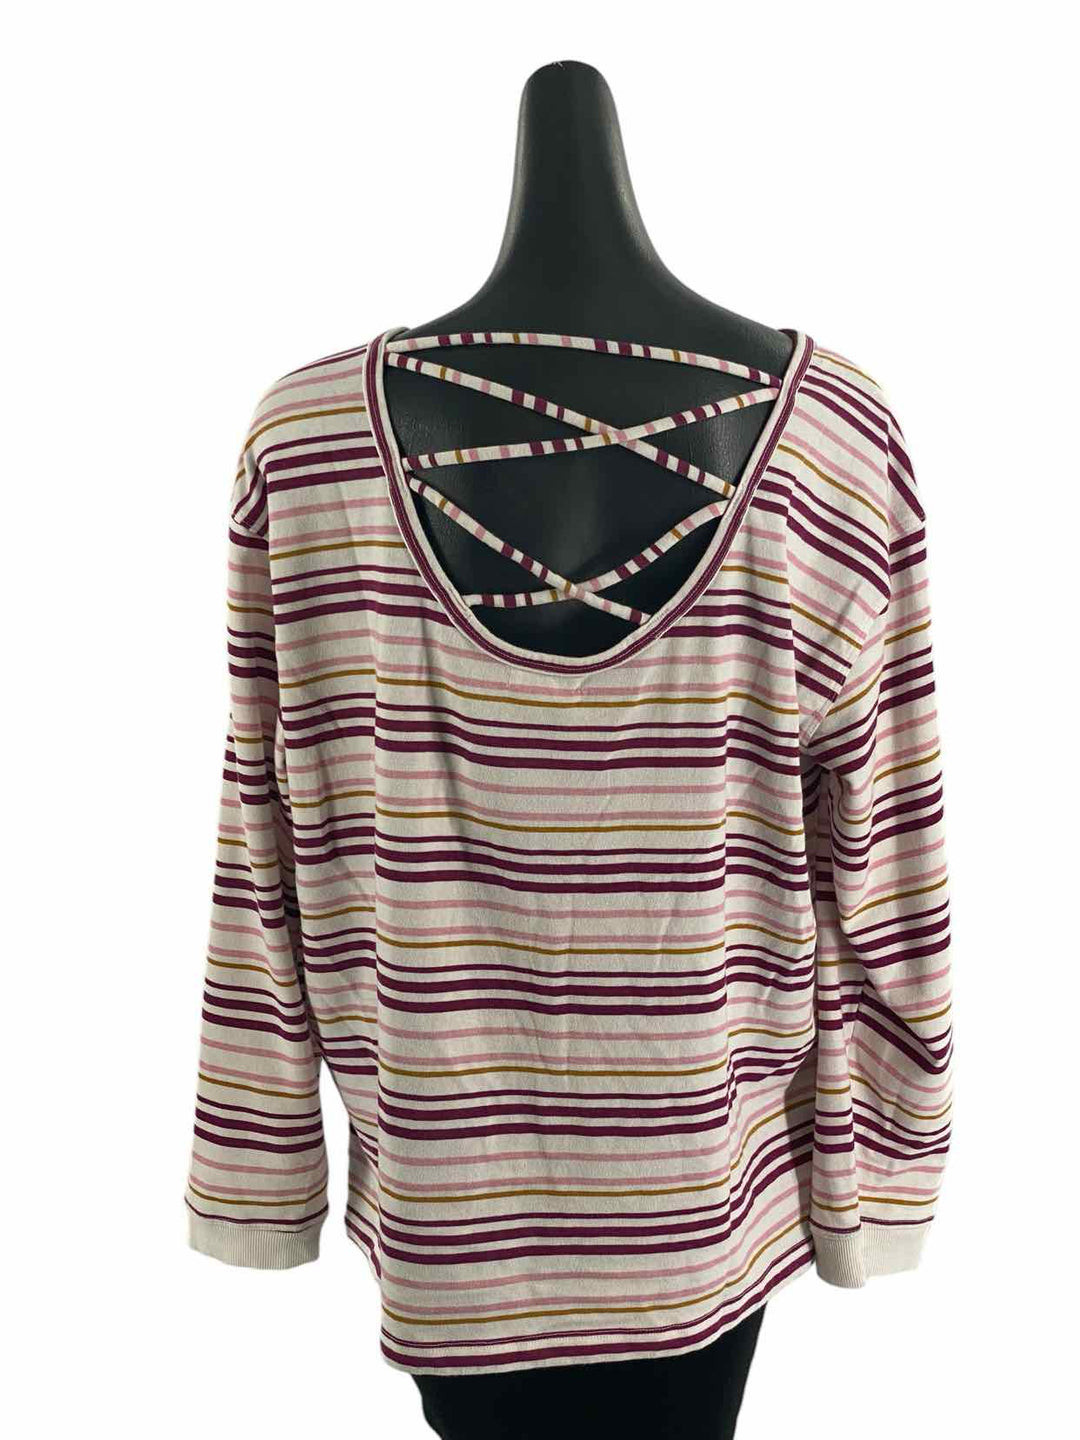 Maurices Size 2X White Purple & Pink Stripes Long Sleeve Shirts